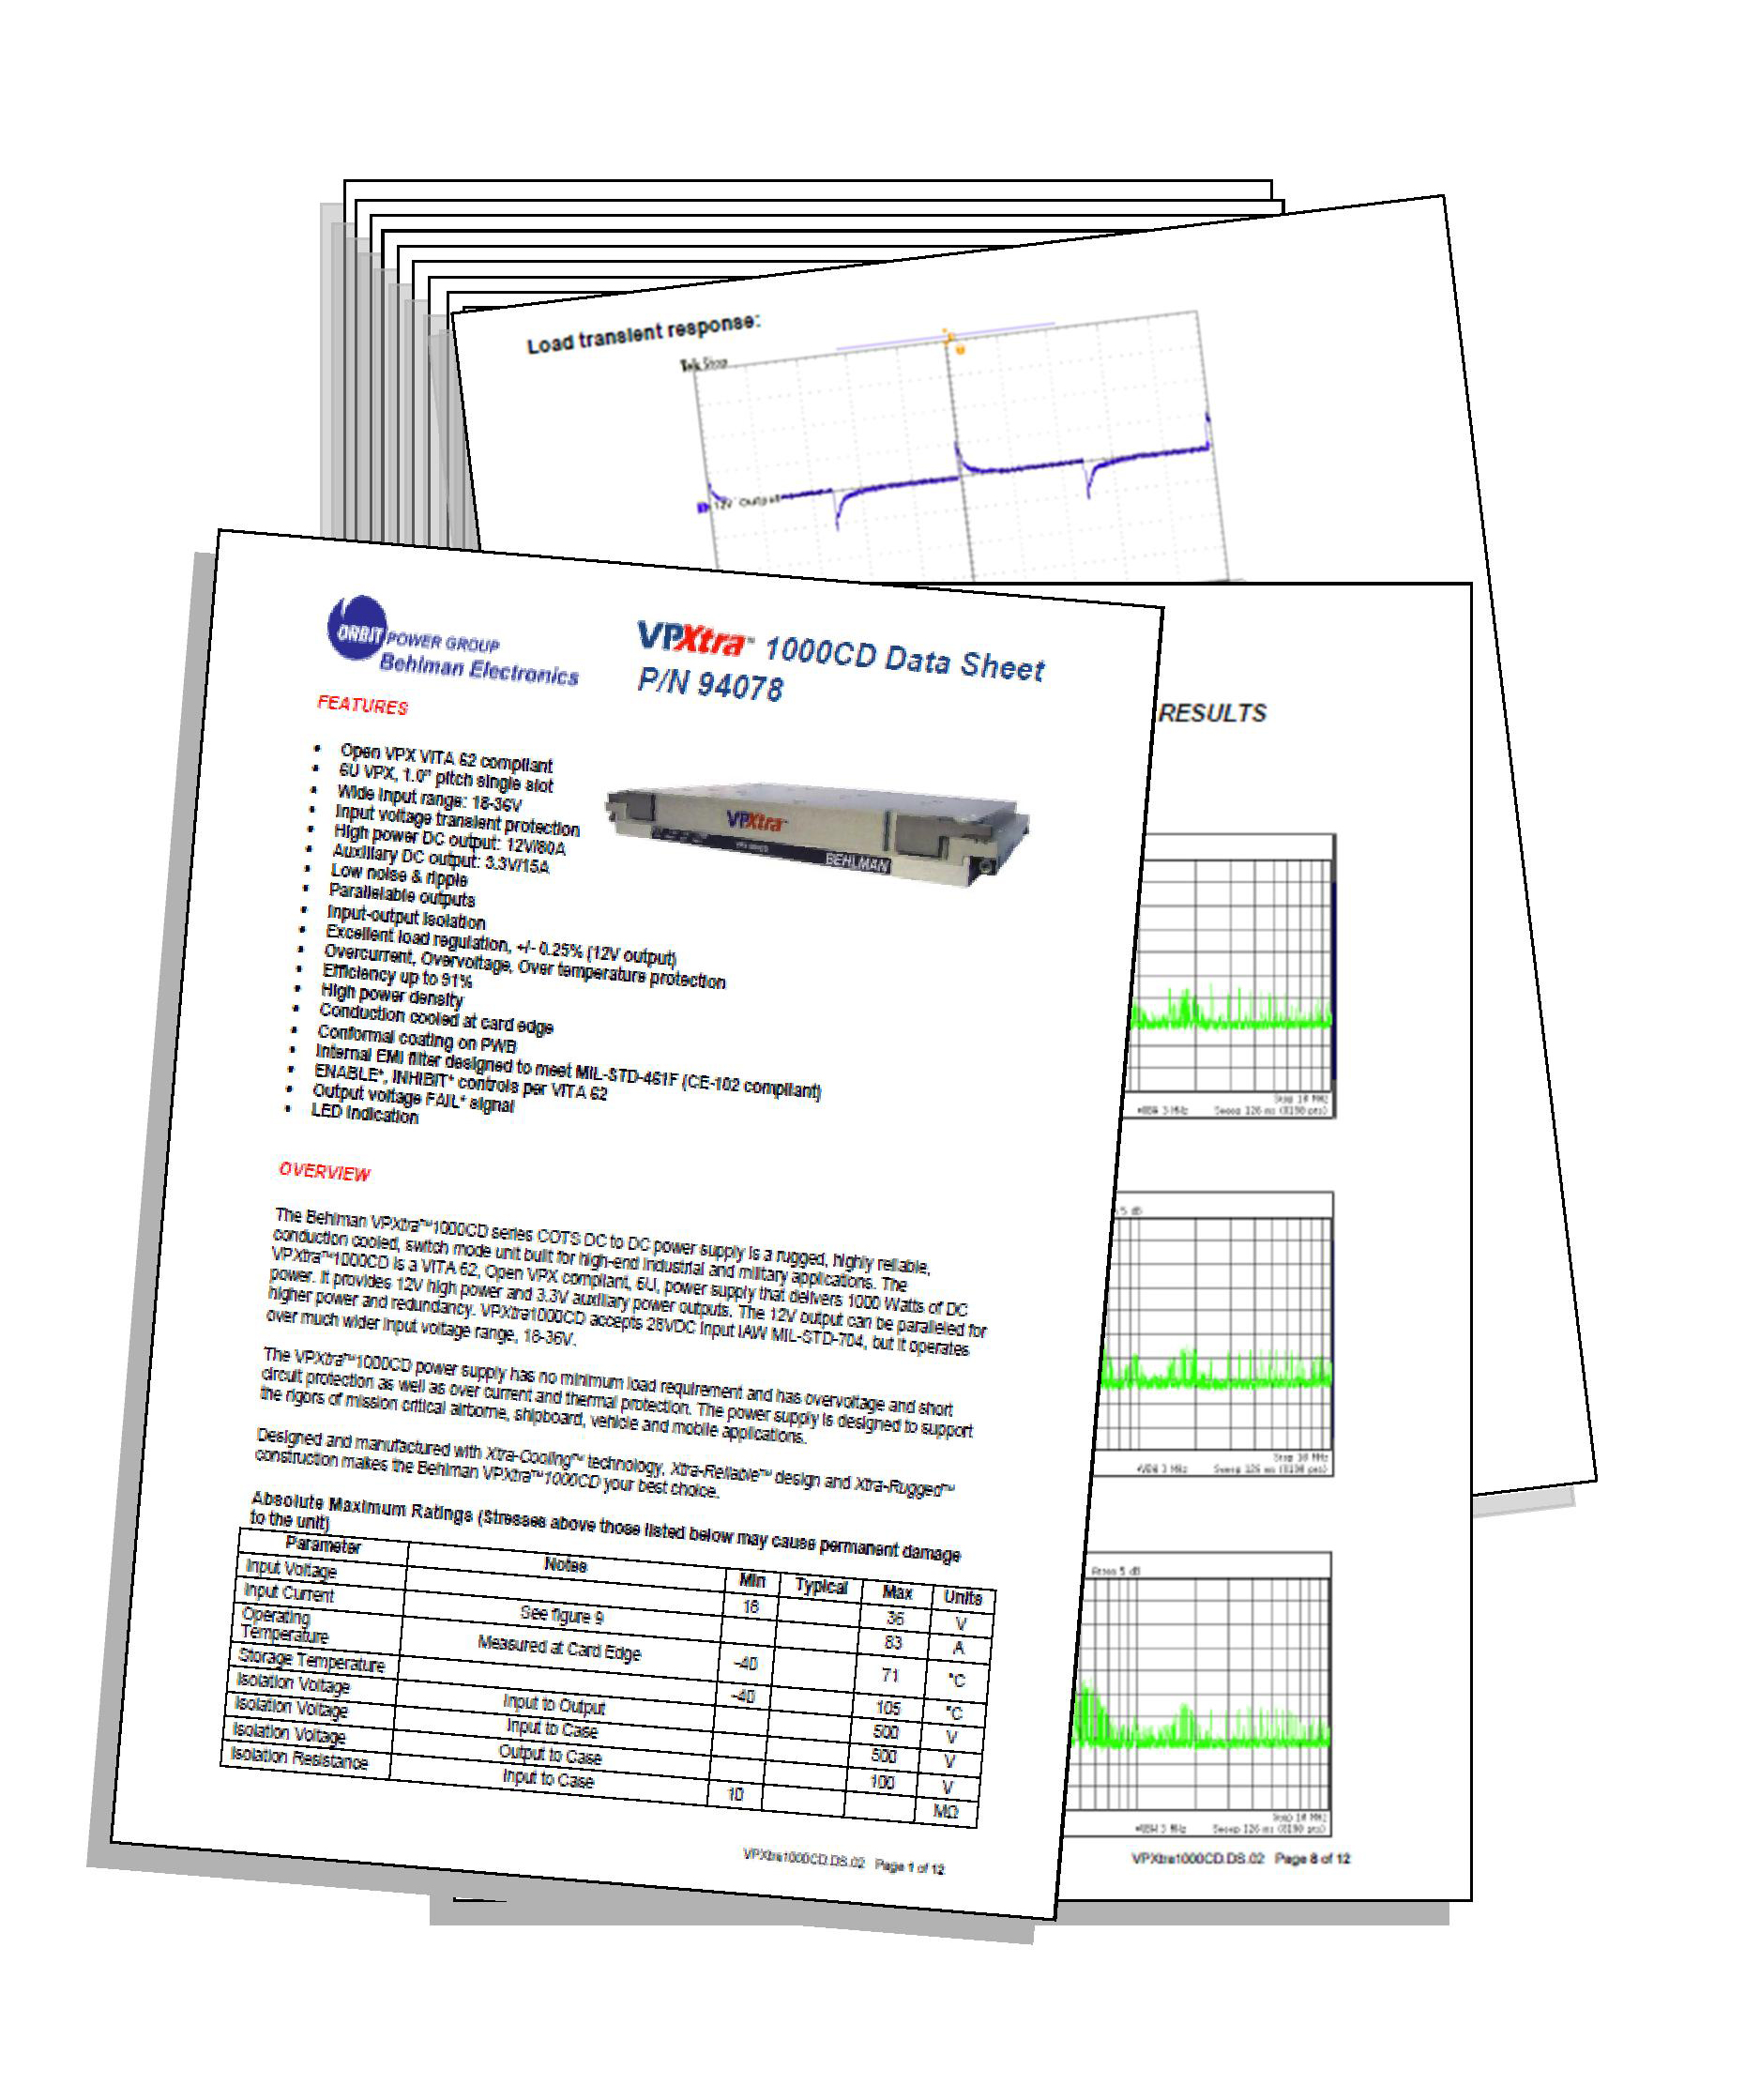 Behlman’s VPXtra™ 1000CD and VPXtra™ 1000CM “Expanded” Data Sheets provide a combined total of 27 pages of detailed information about features, benefits, overviews, and specific technical data.